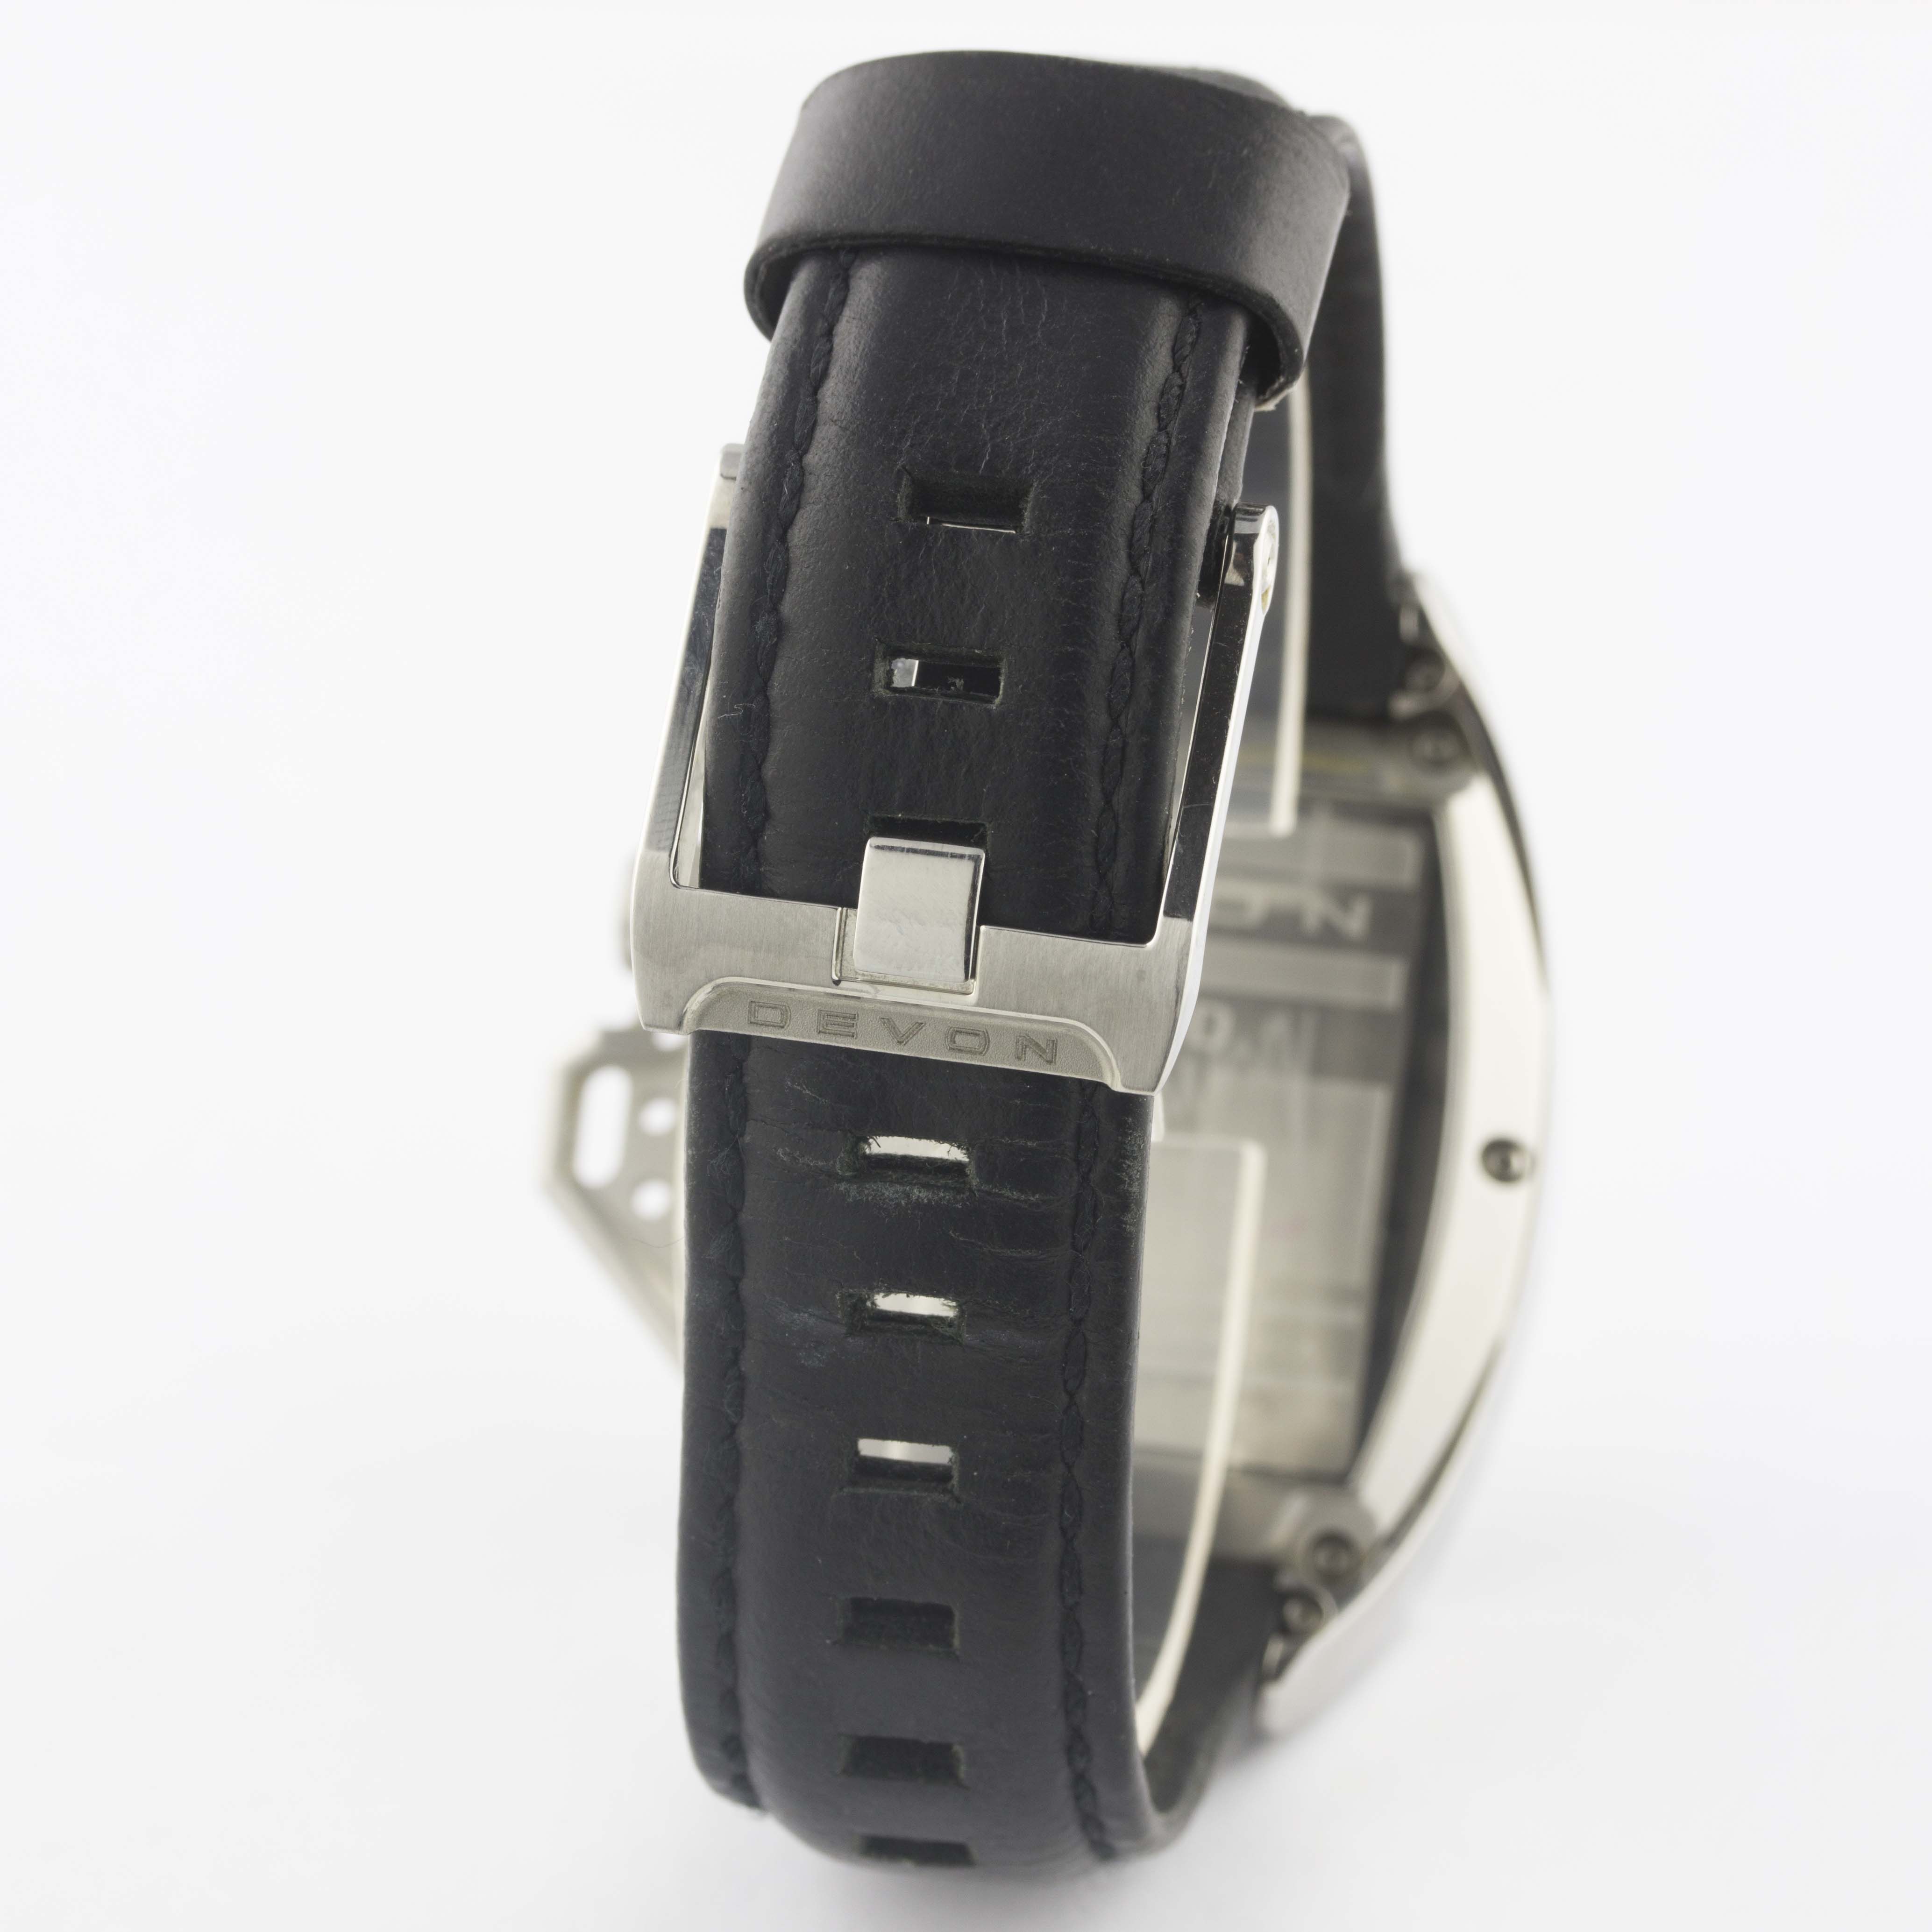 A GENTLEMAN'S STAINLESS STEEL DEVON TREAD 2 TIME BELT SHINING WRIST WATCH DATED 2014, WITH - Image 5 of 8